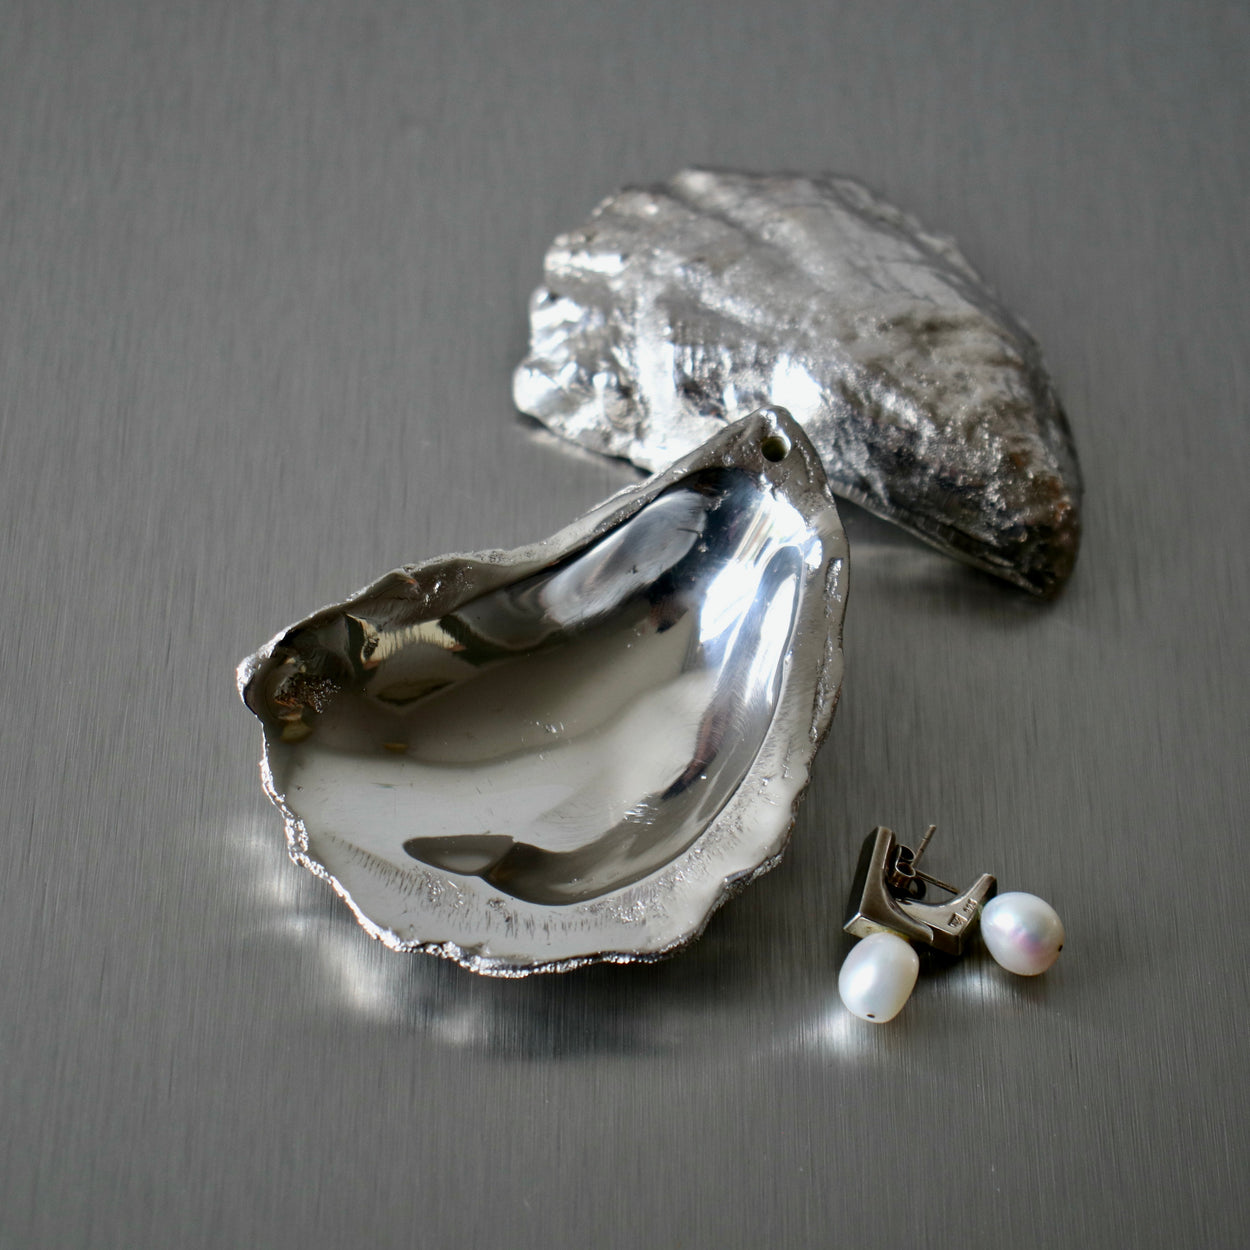 Silver oyster shell incense holders with pearl earrings on a stainless steel bench top.